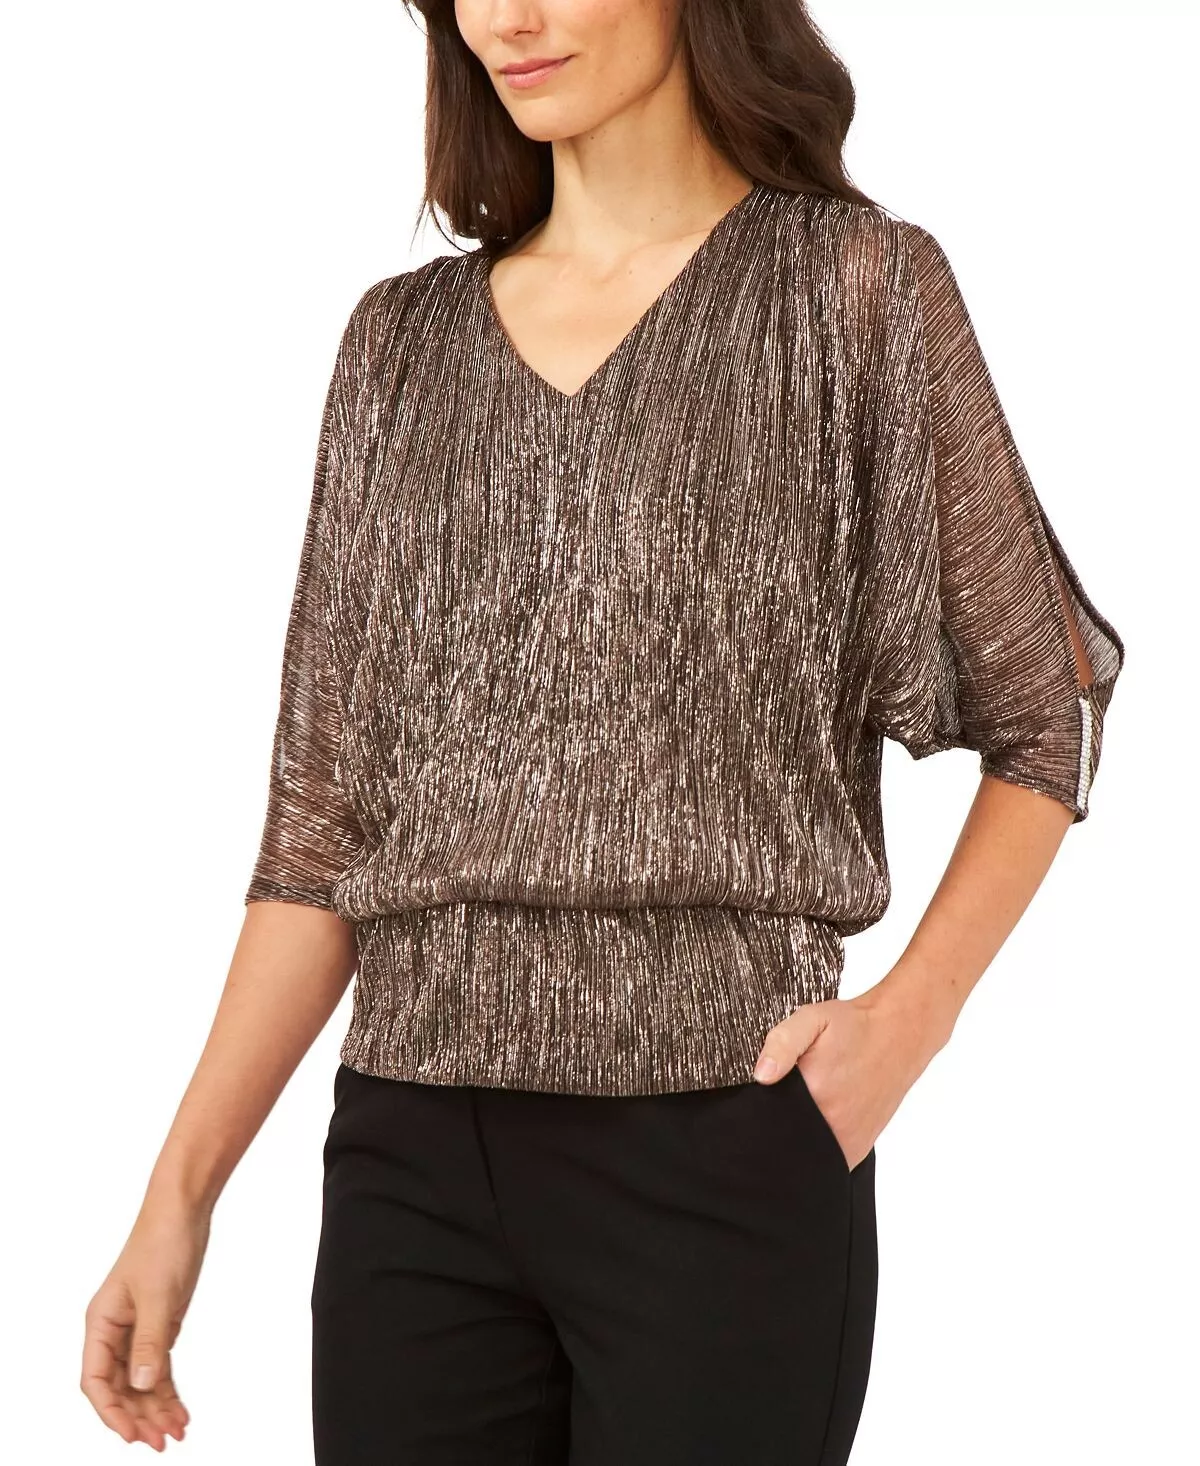 Cold-shoulder cutouts with rhinestone detail give this MSK blouse that extra special sparkle you've been looking for. Lined V-neckline Imported Three-quarter split sleeves Rhinestone trim at cuffs Blouson silhouette Pullover style